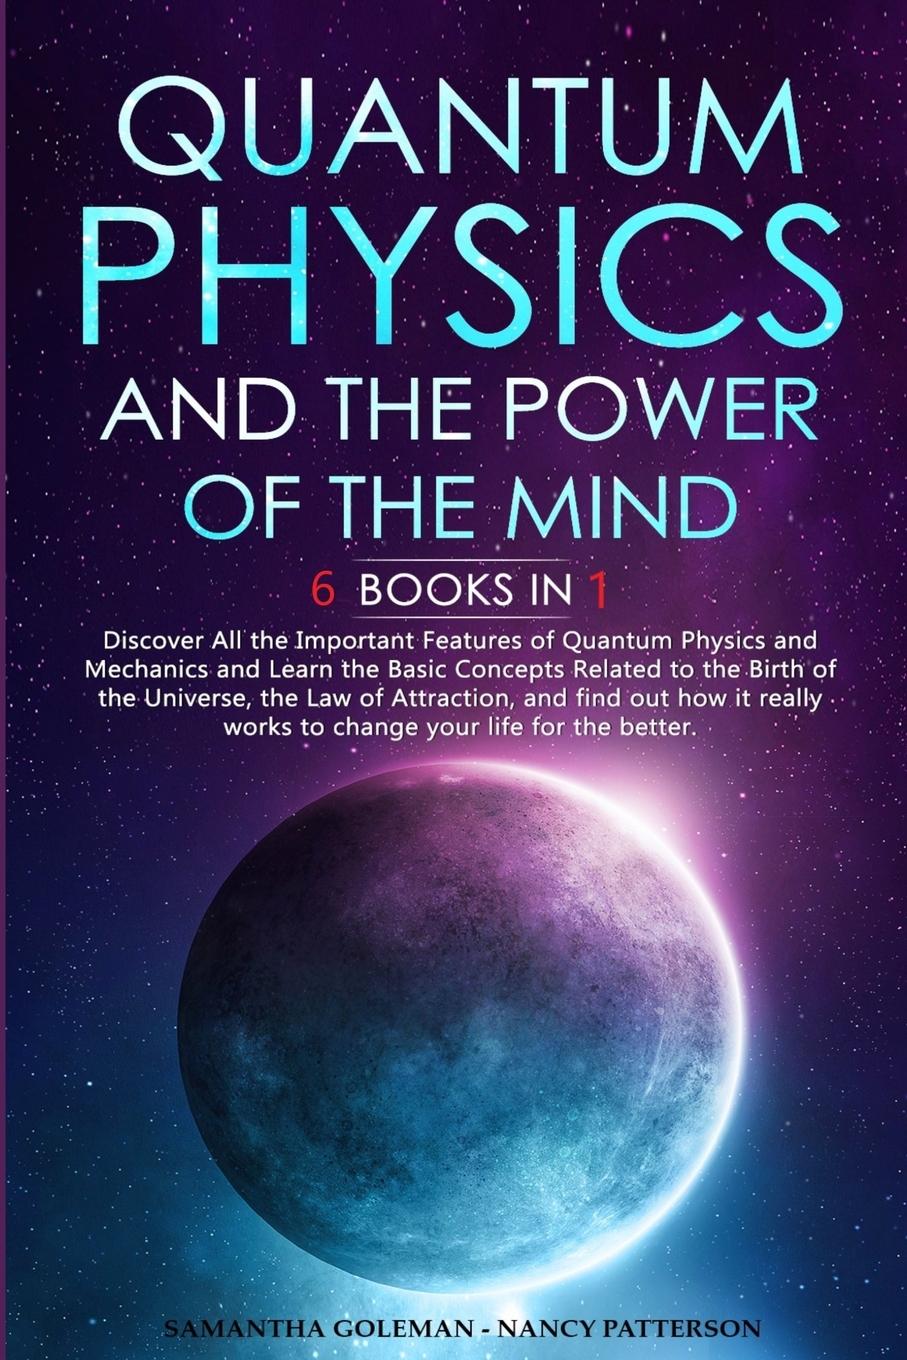 Book Quantum Physics and The Power of the Mind Nancy Patterson